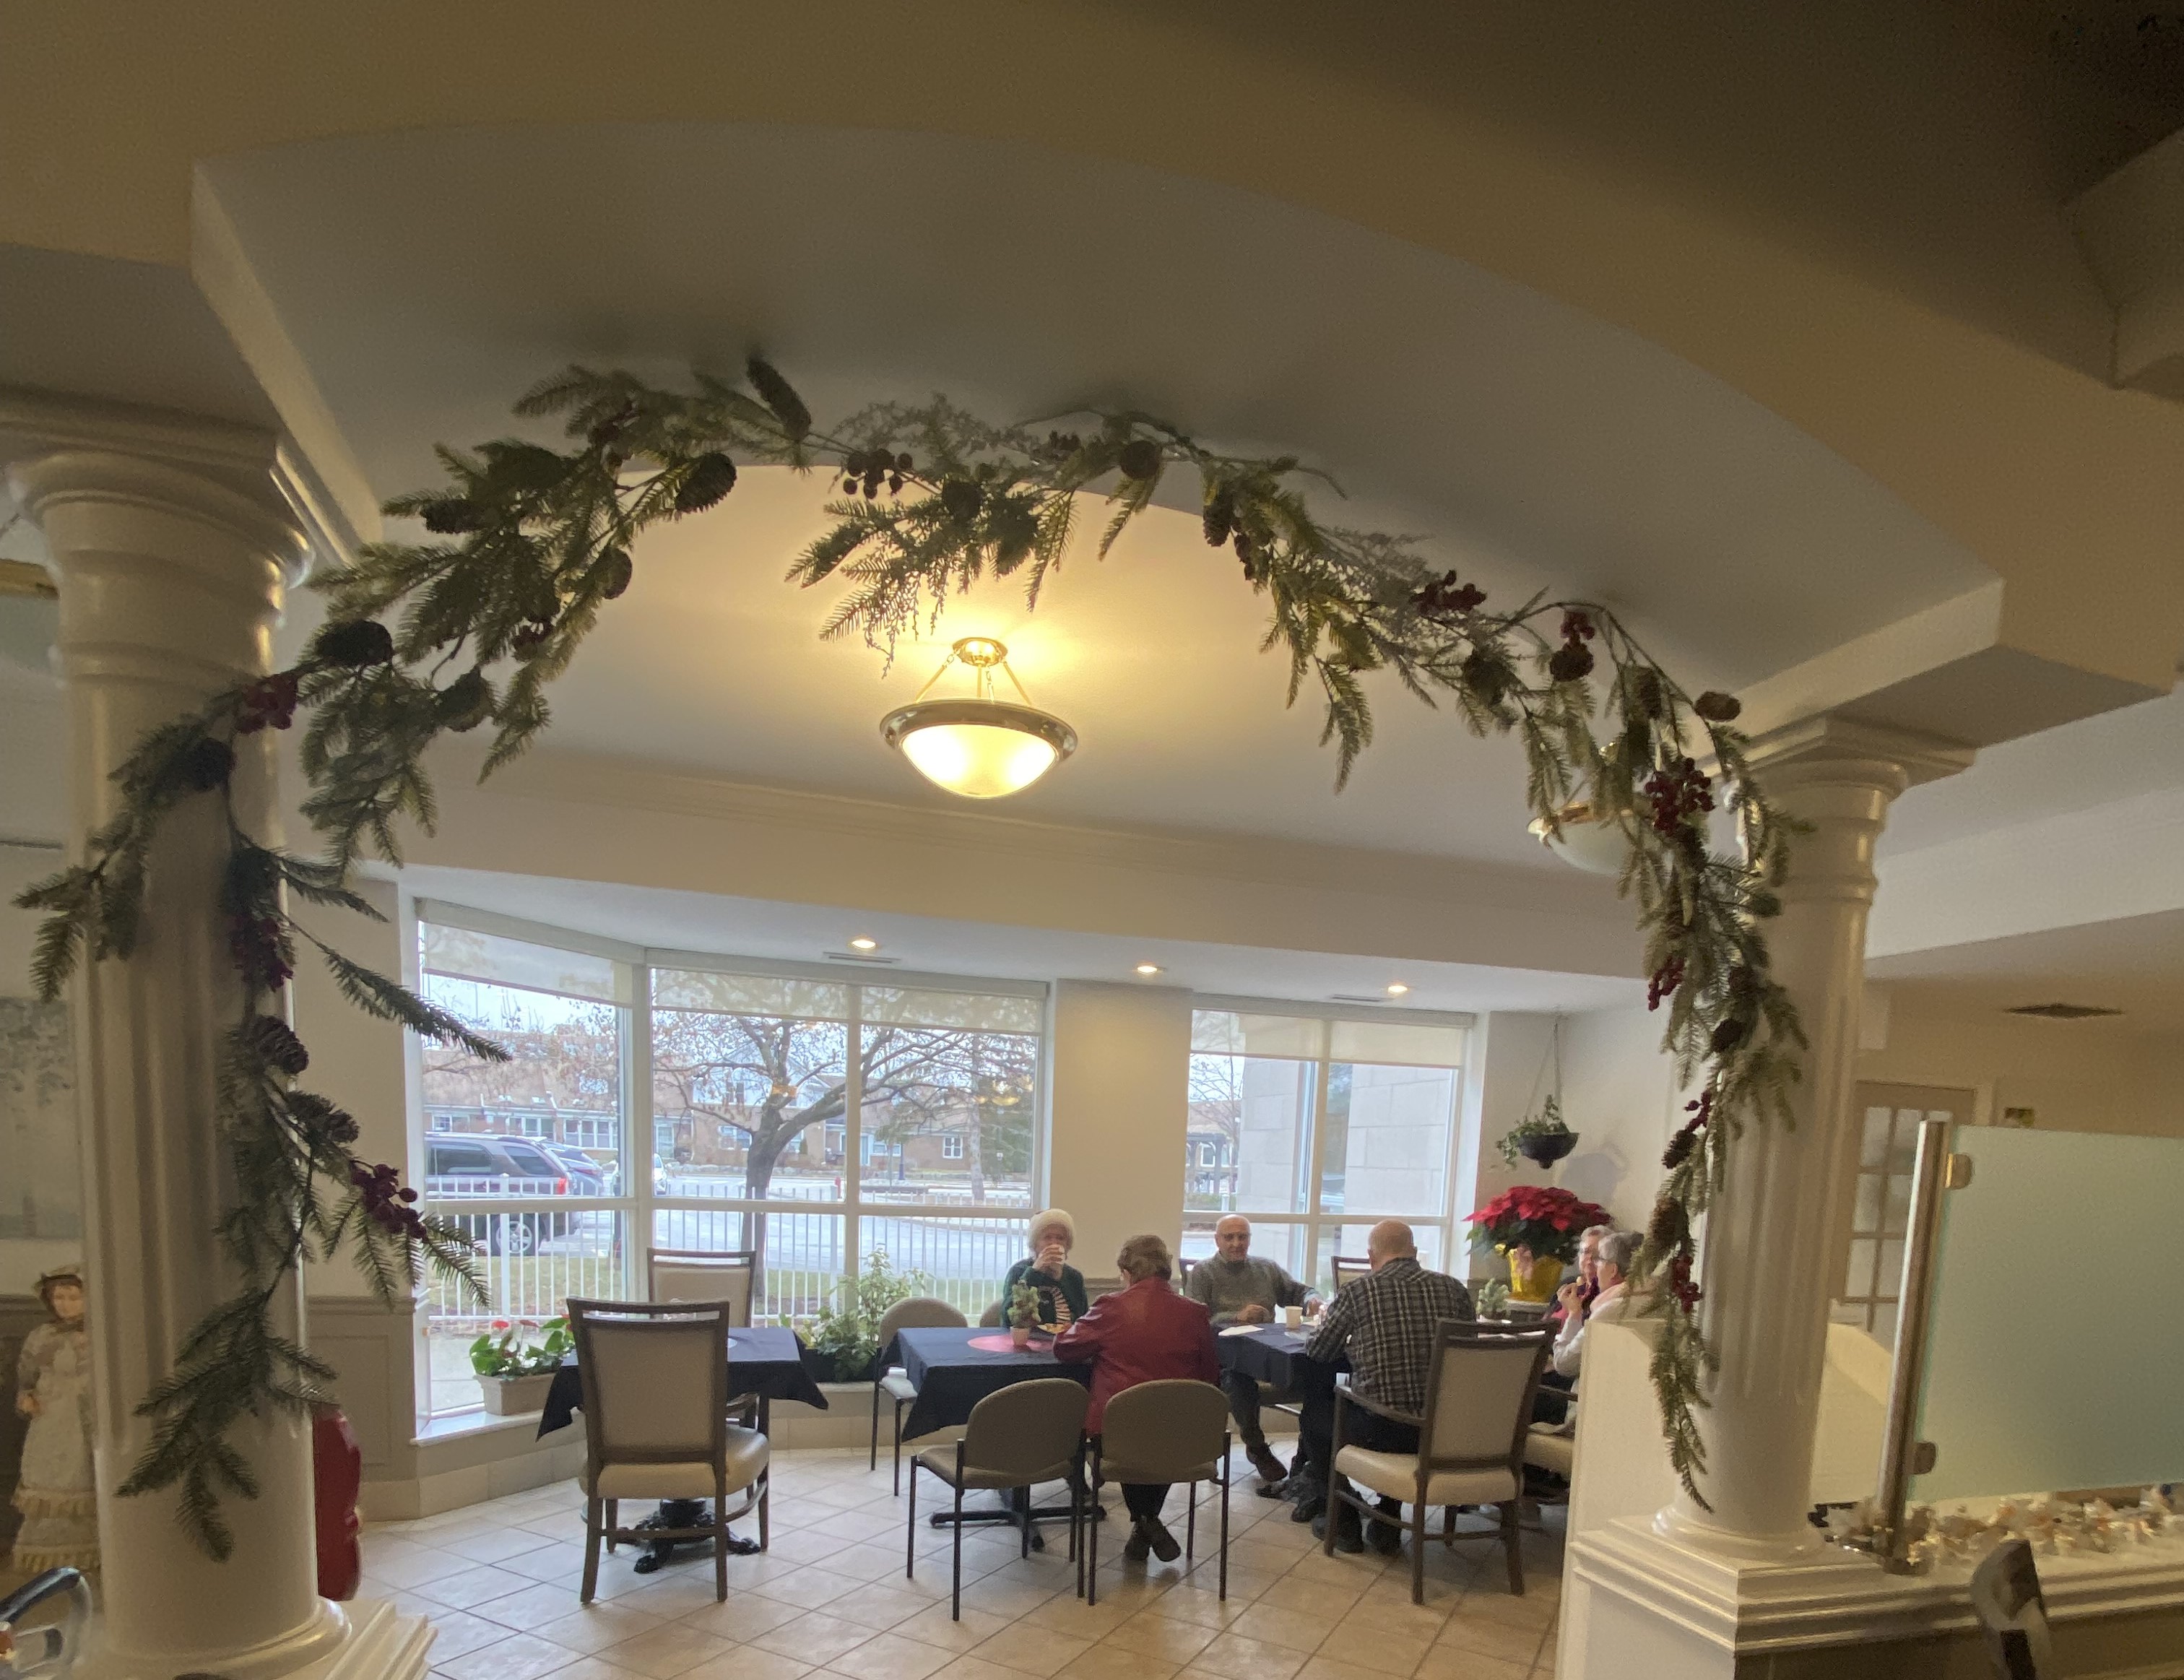 Image of residents enjoying time together during the holidays at Luther Village on the Park.